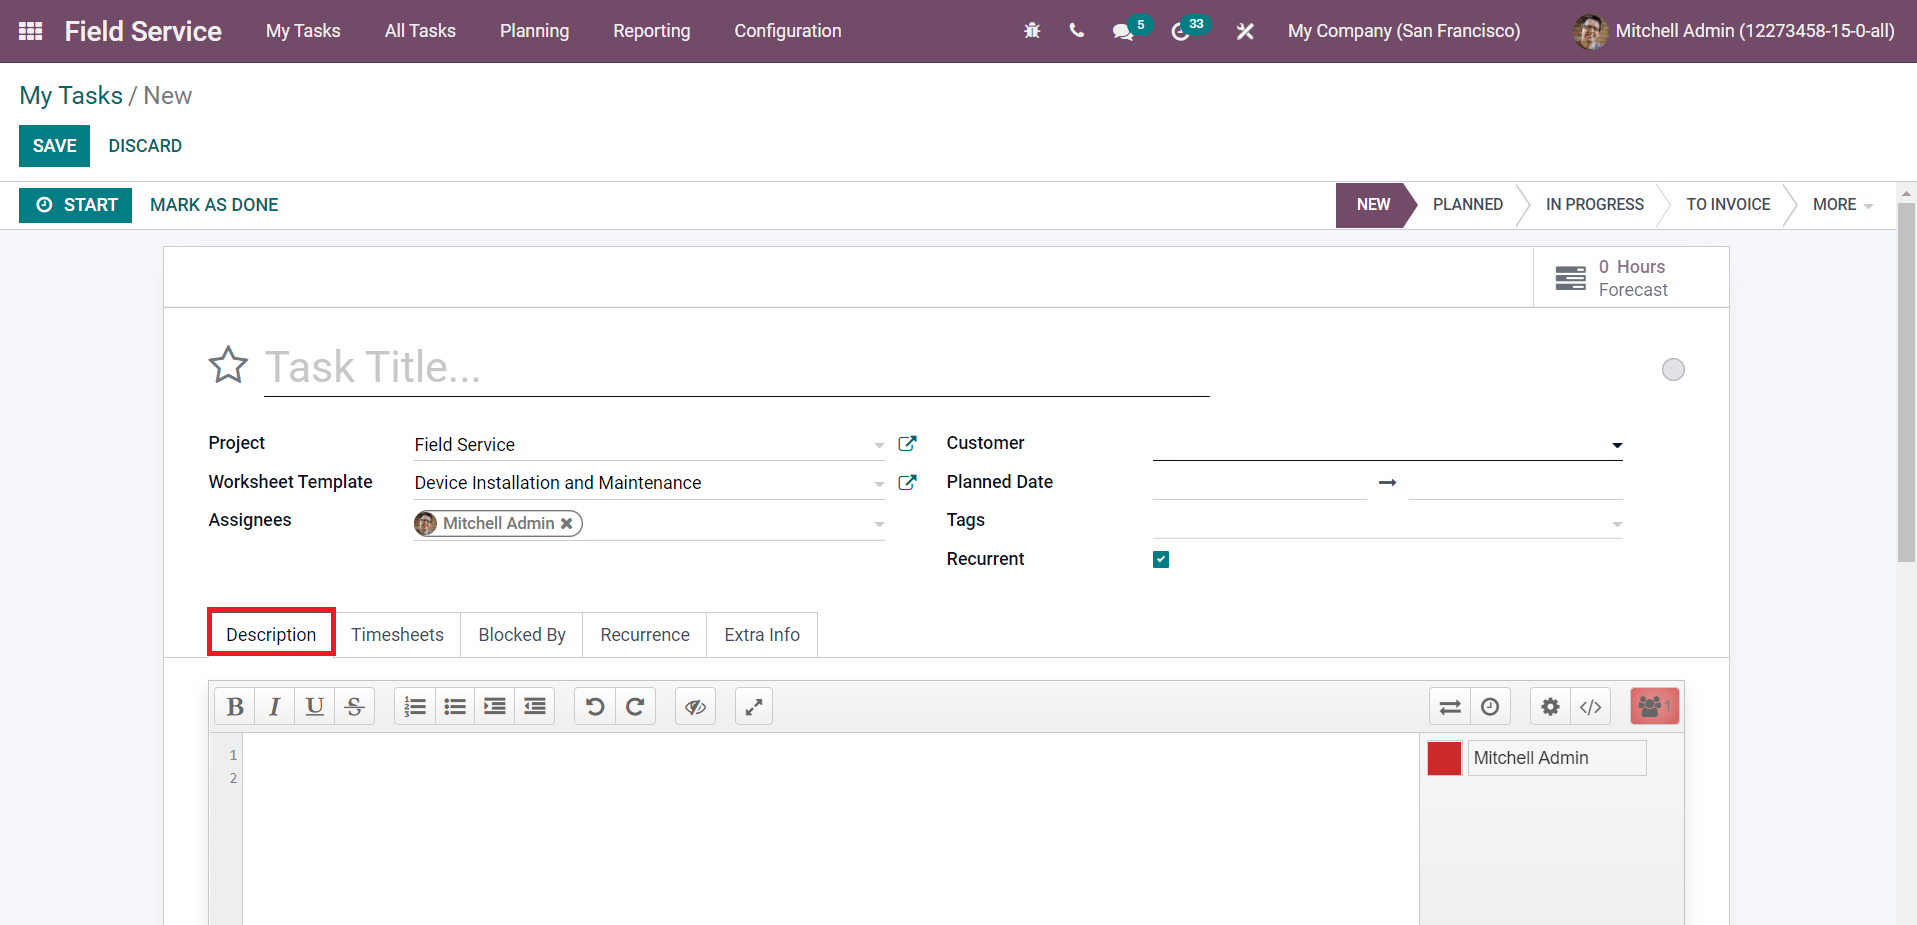 steps-to-create-new-tasks-for-field-services-in-odoo-15